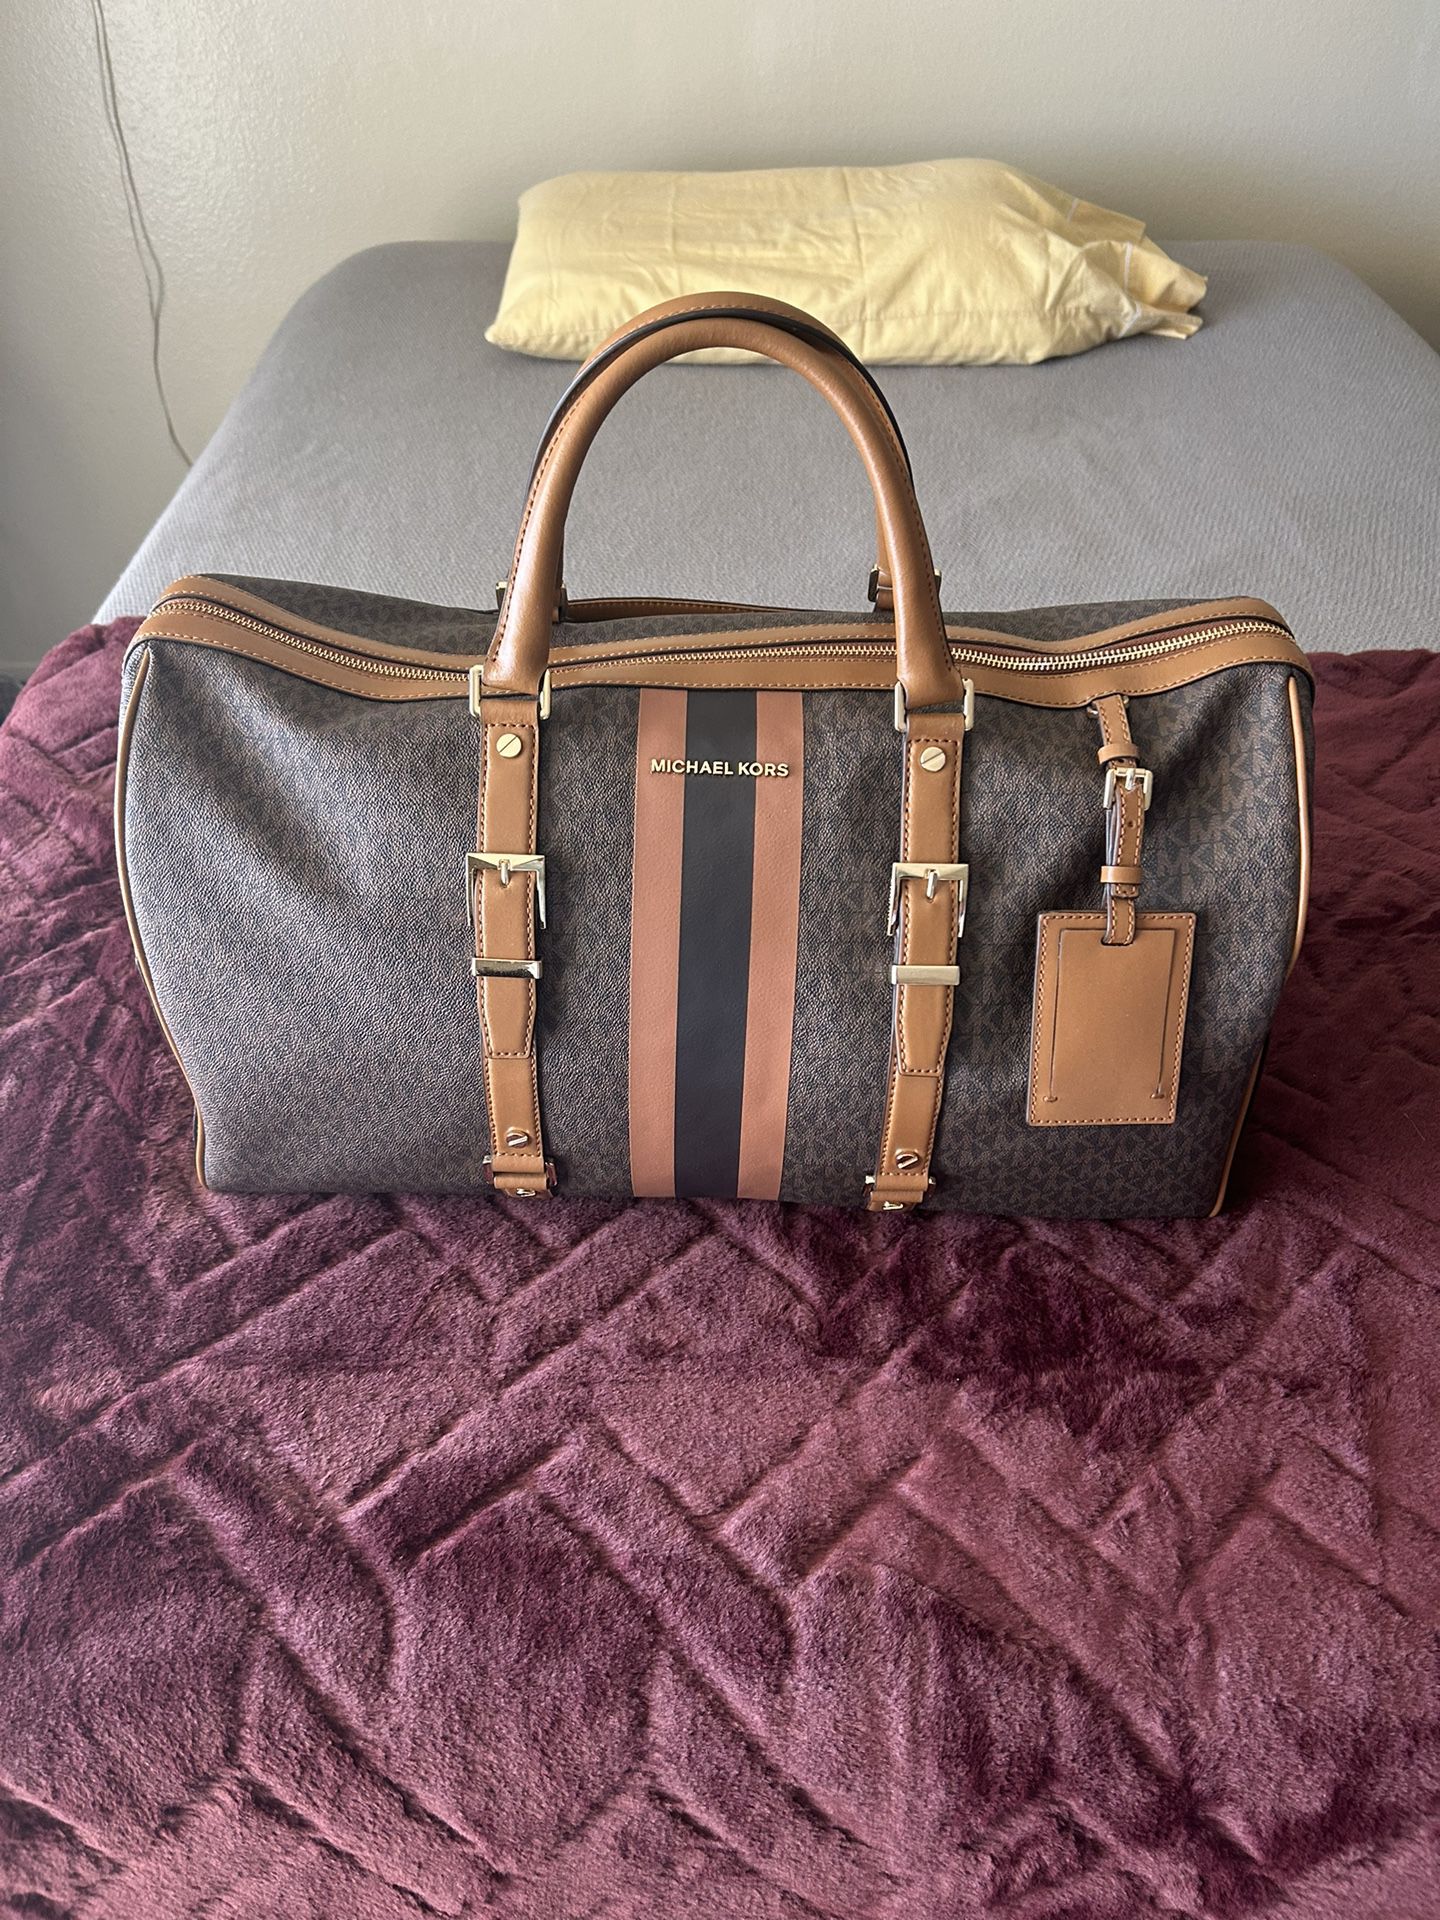 LOUIS VUITTON WALLET for Sale in Lincoln Acres, CA - OfferUp